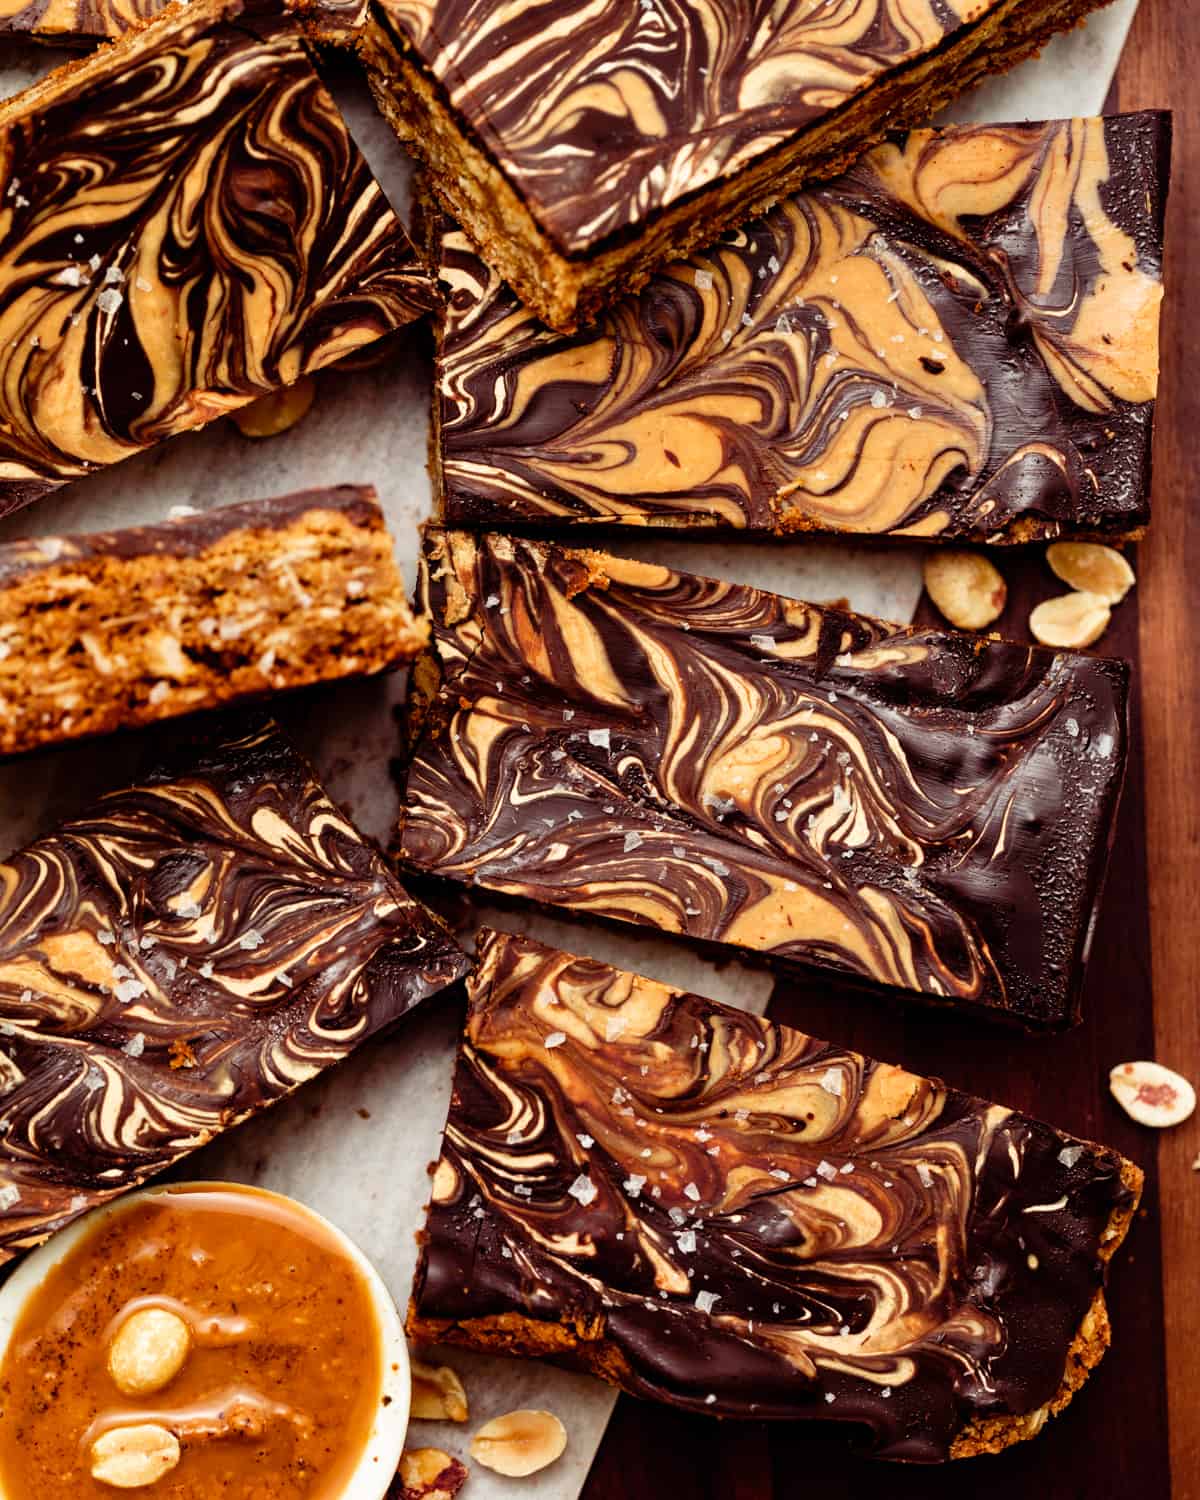 chocolate peanut butter oatmeal bars cut into squares and lined up together on a brown plate.